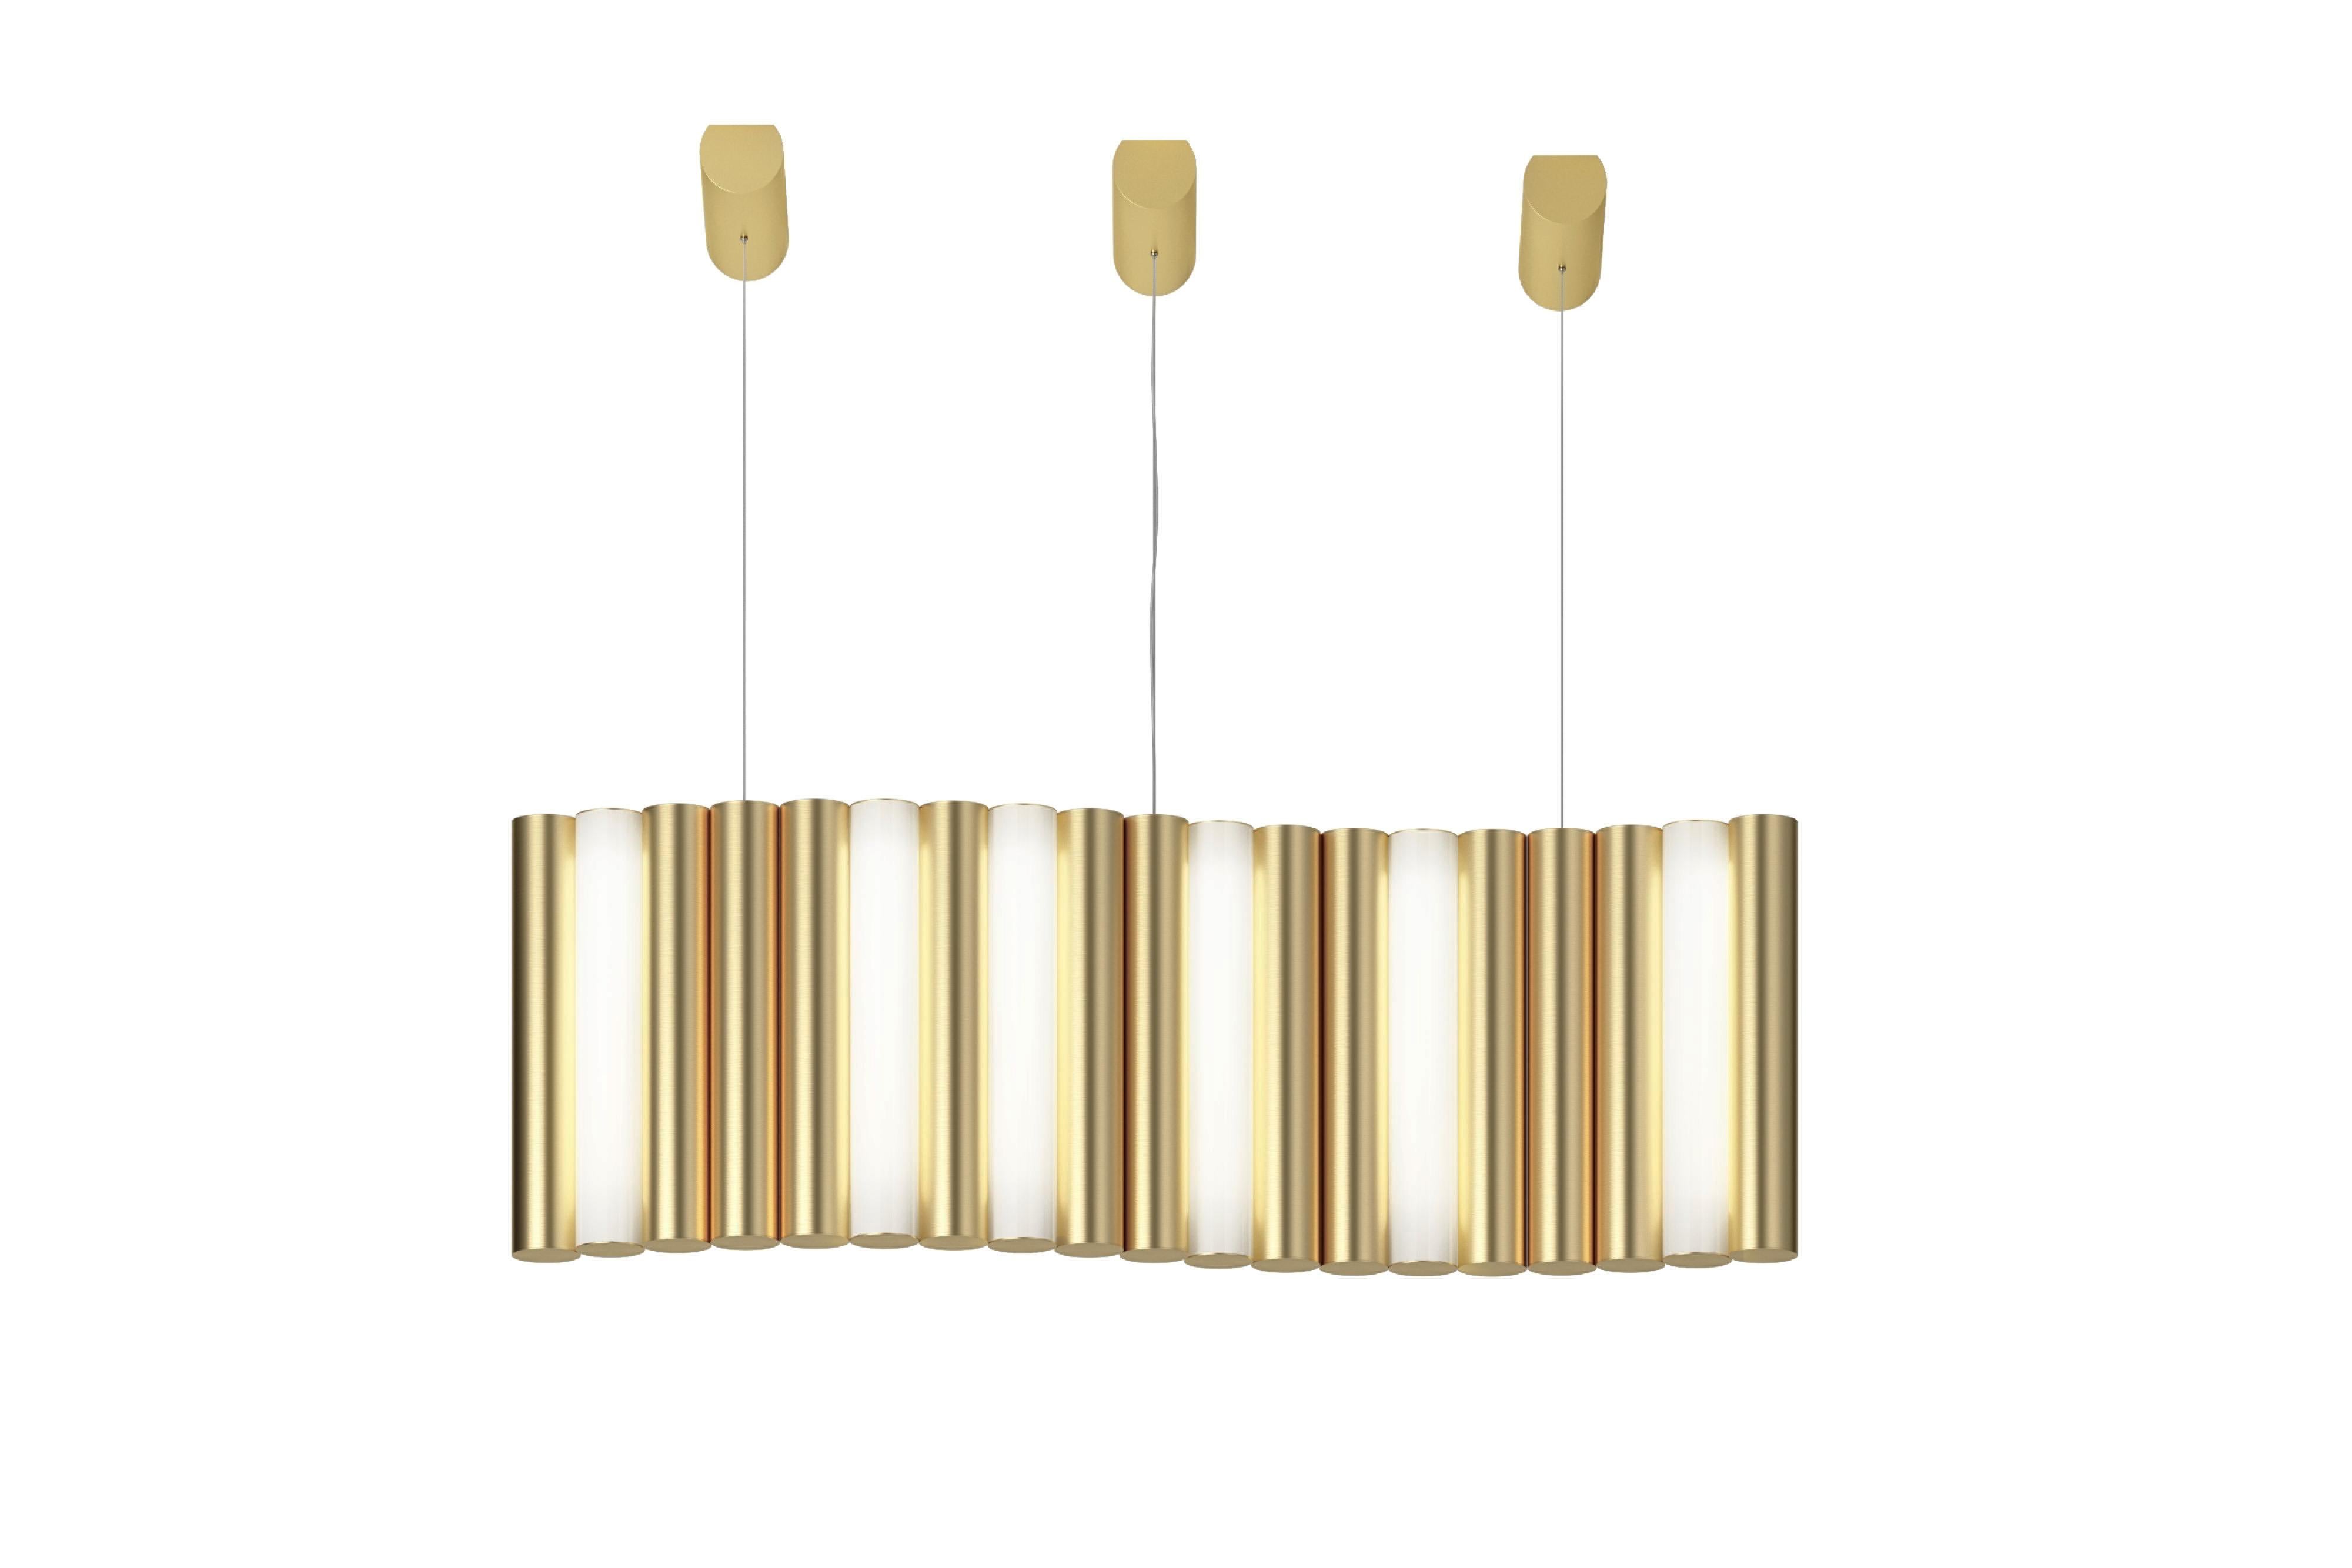 Gamma L19 brass pendant by Sylvain Willenz
Dimensions: D96 x W41.5 X H36.3 cm
Materials: solid brass, white polycarbonate diffuser, metal cable and transparent electric cable.
Others finishes and dimensions are available.

All our lamps can be